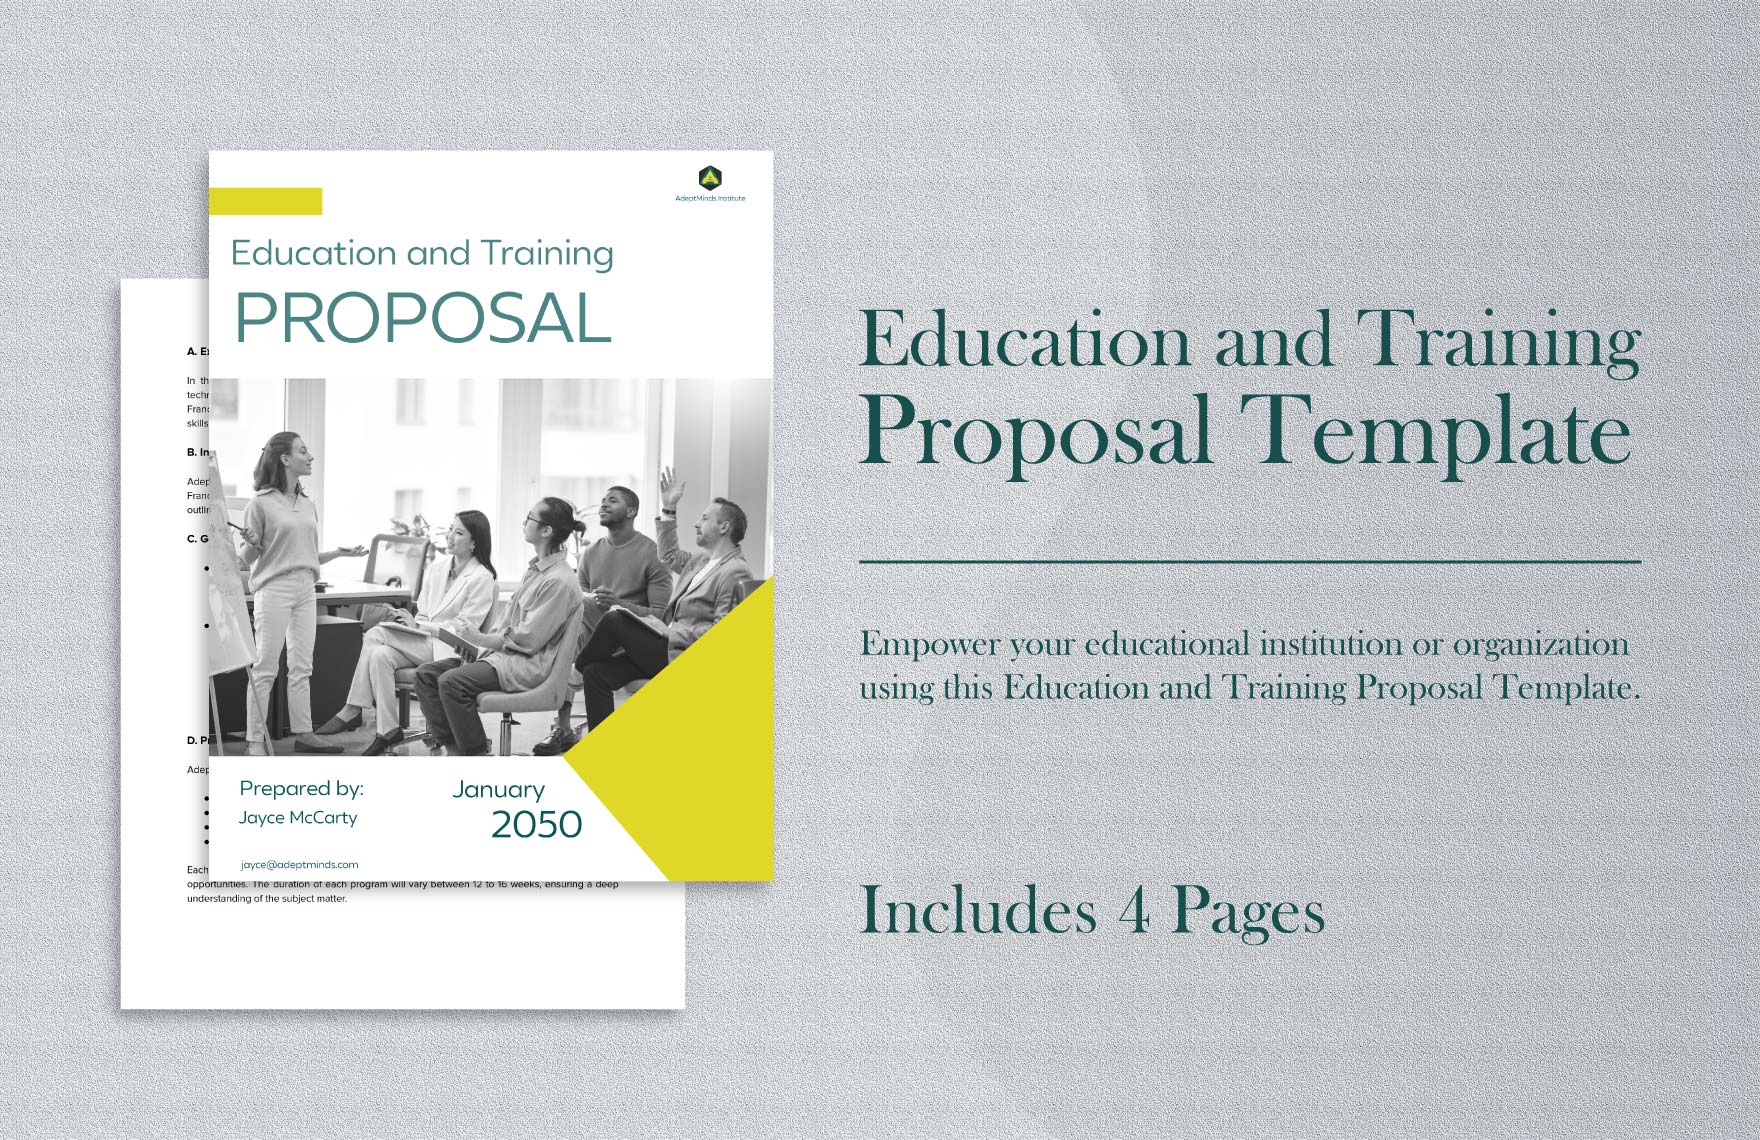  Education and Training Proposal Template